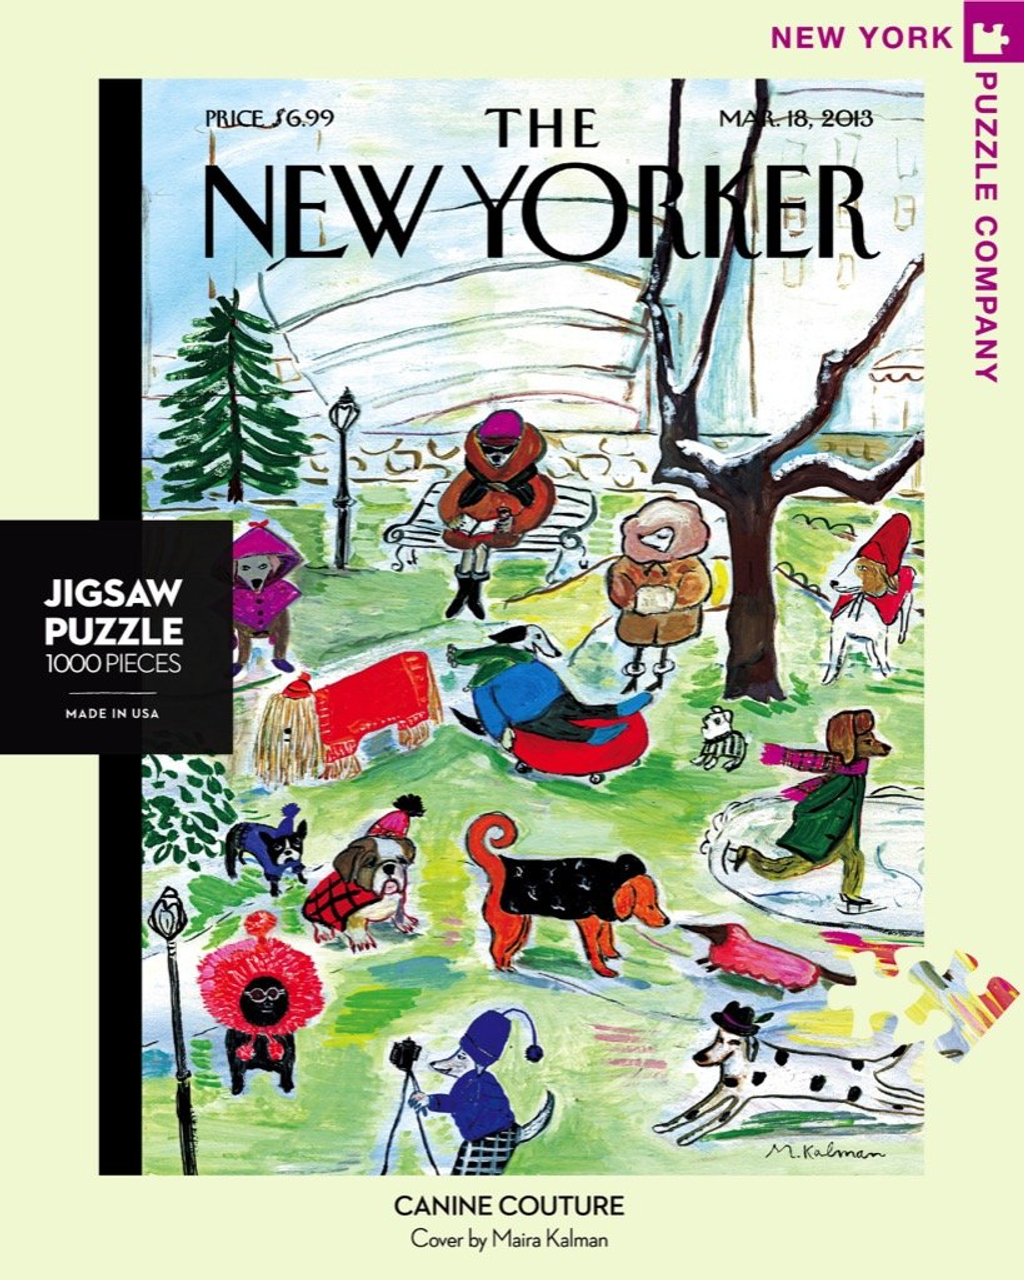 CANINE COUTURE - 1000 Pcs - New Yorker